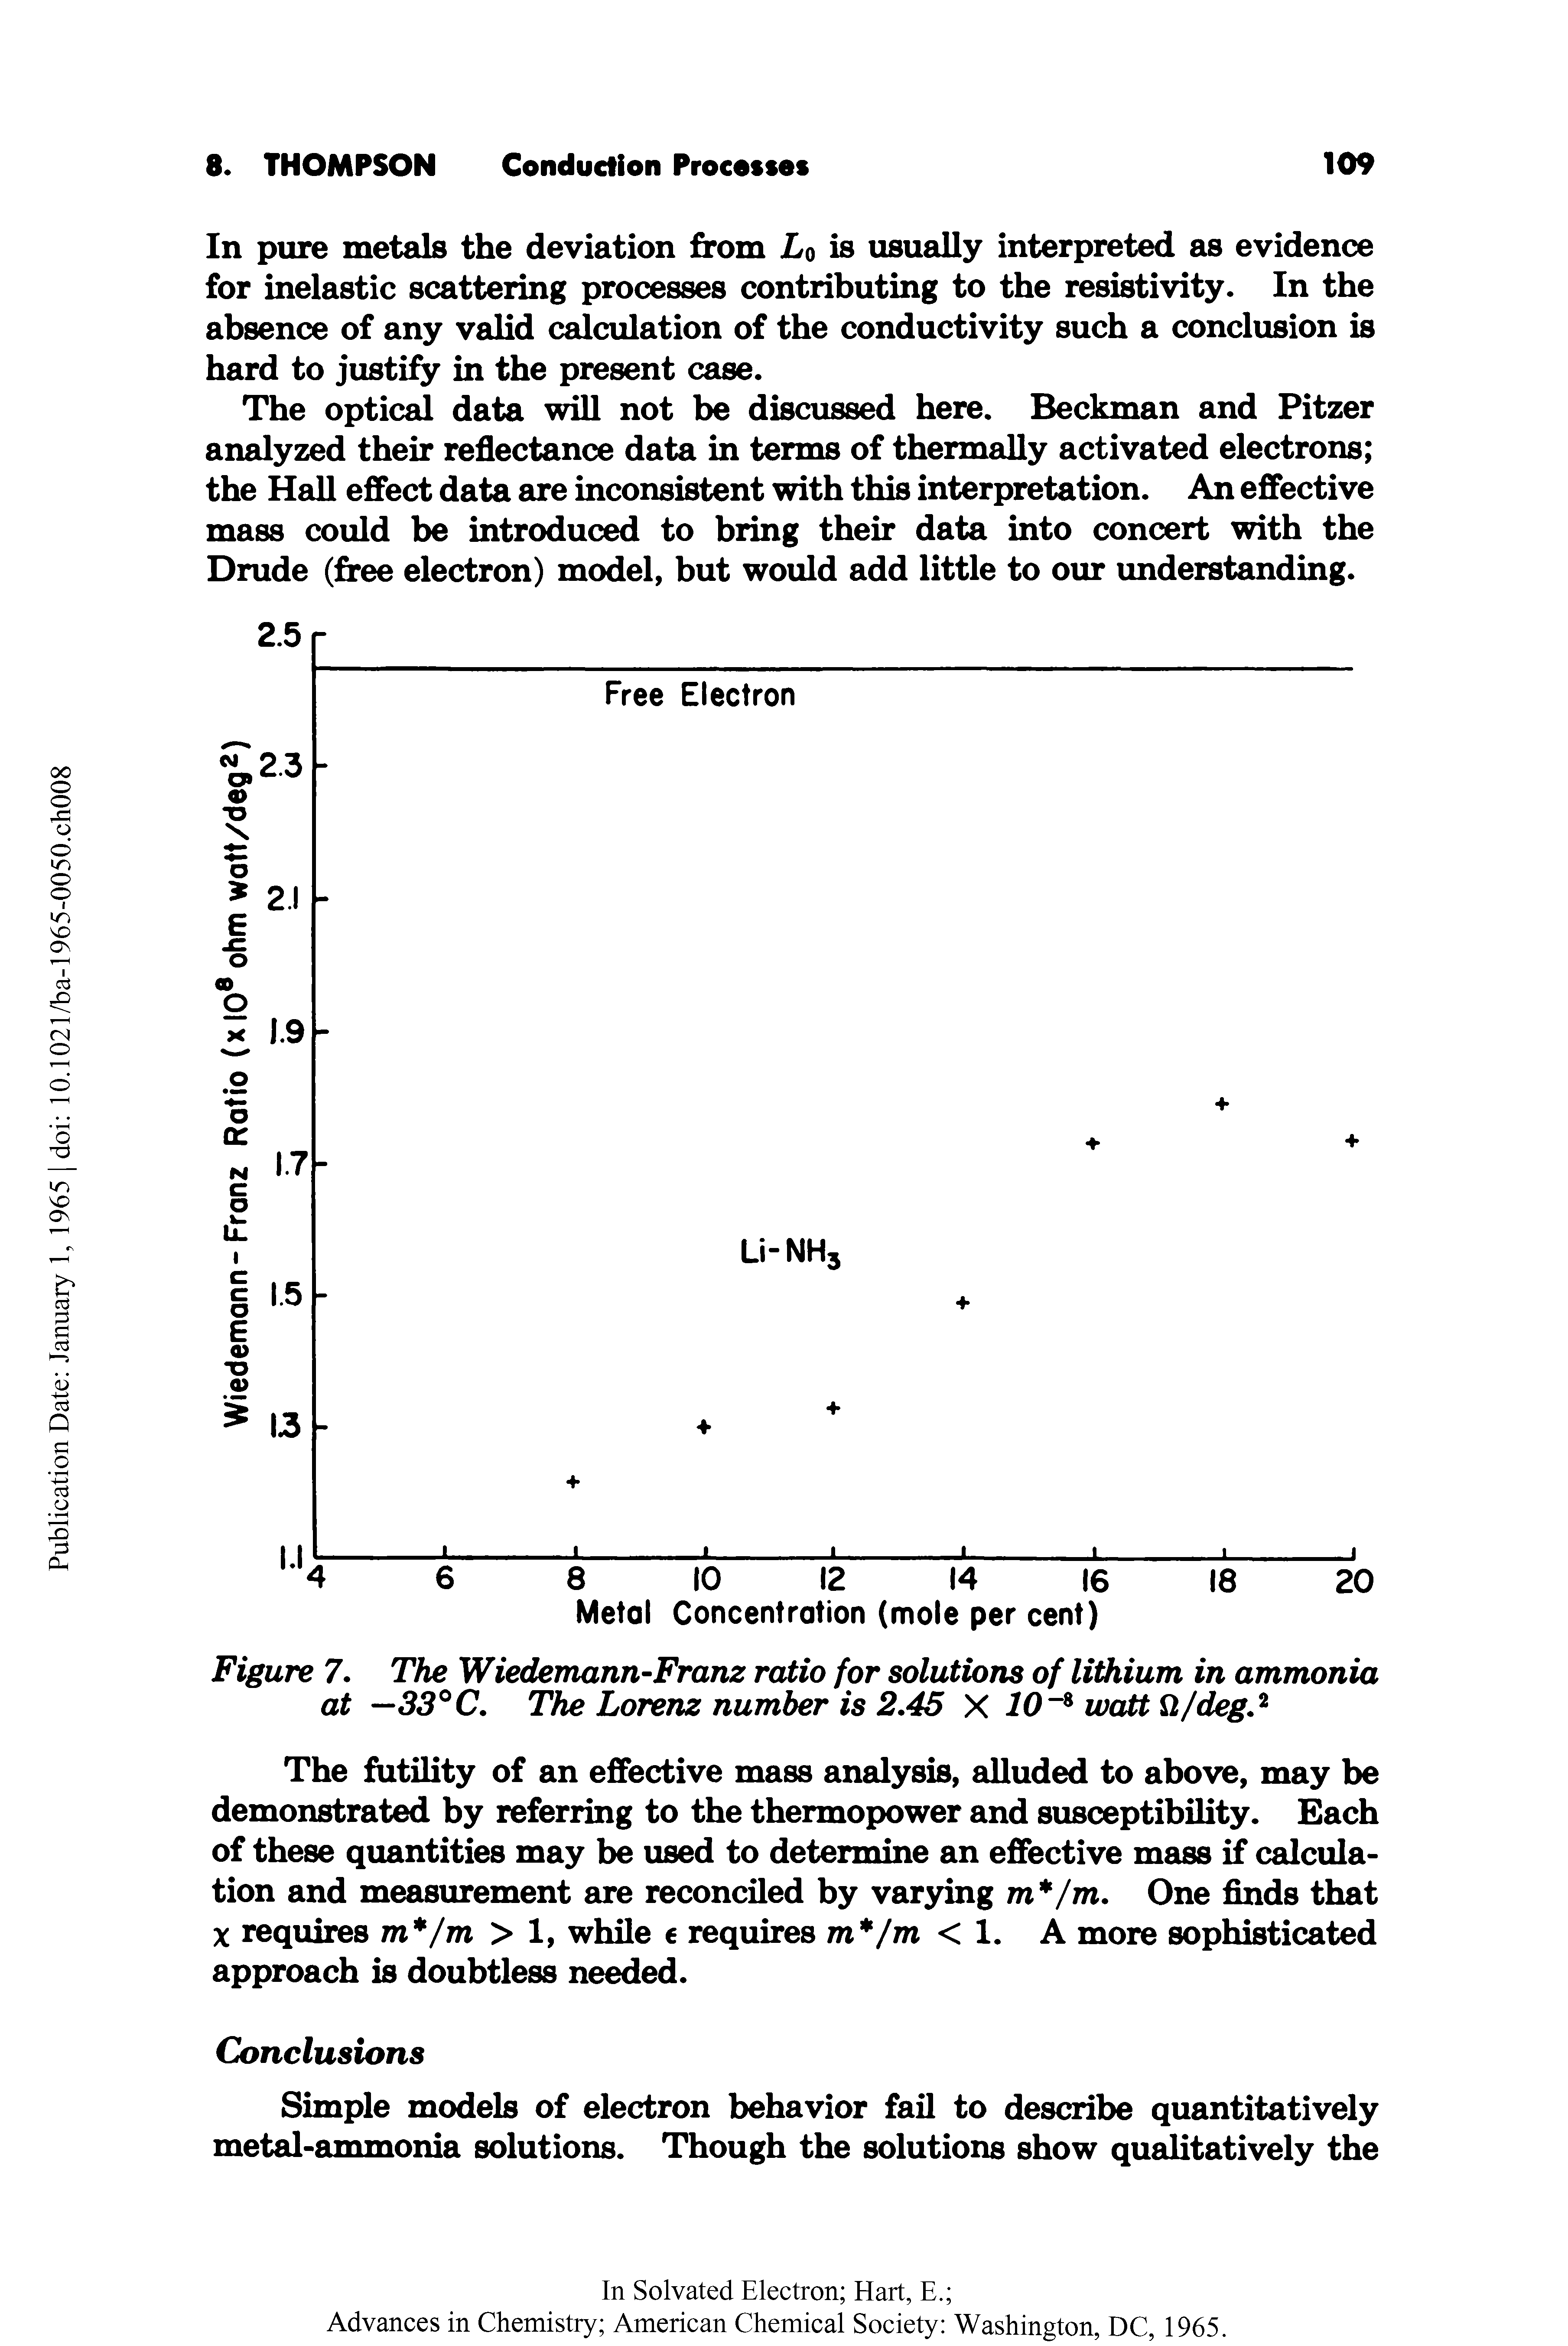 Figure 7. The Wiedemann-Franz ratio for solutions of lithium in ammonia at —33° C. The Lorenz number is 2.45 X 10 8 watt it/deg.2...